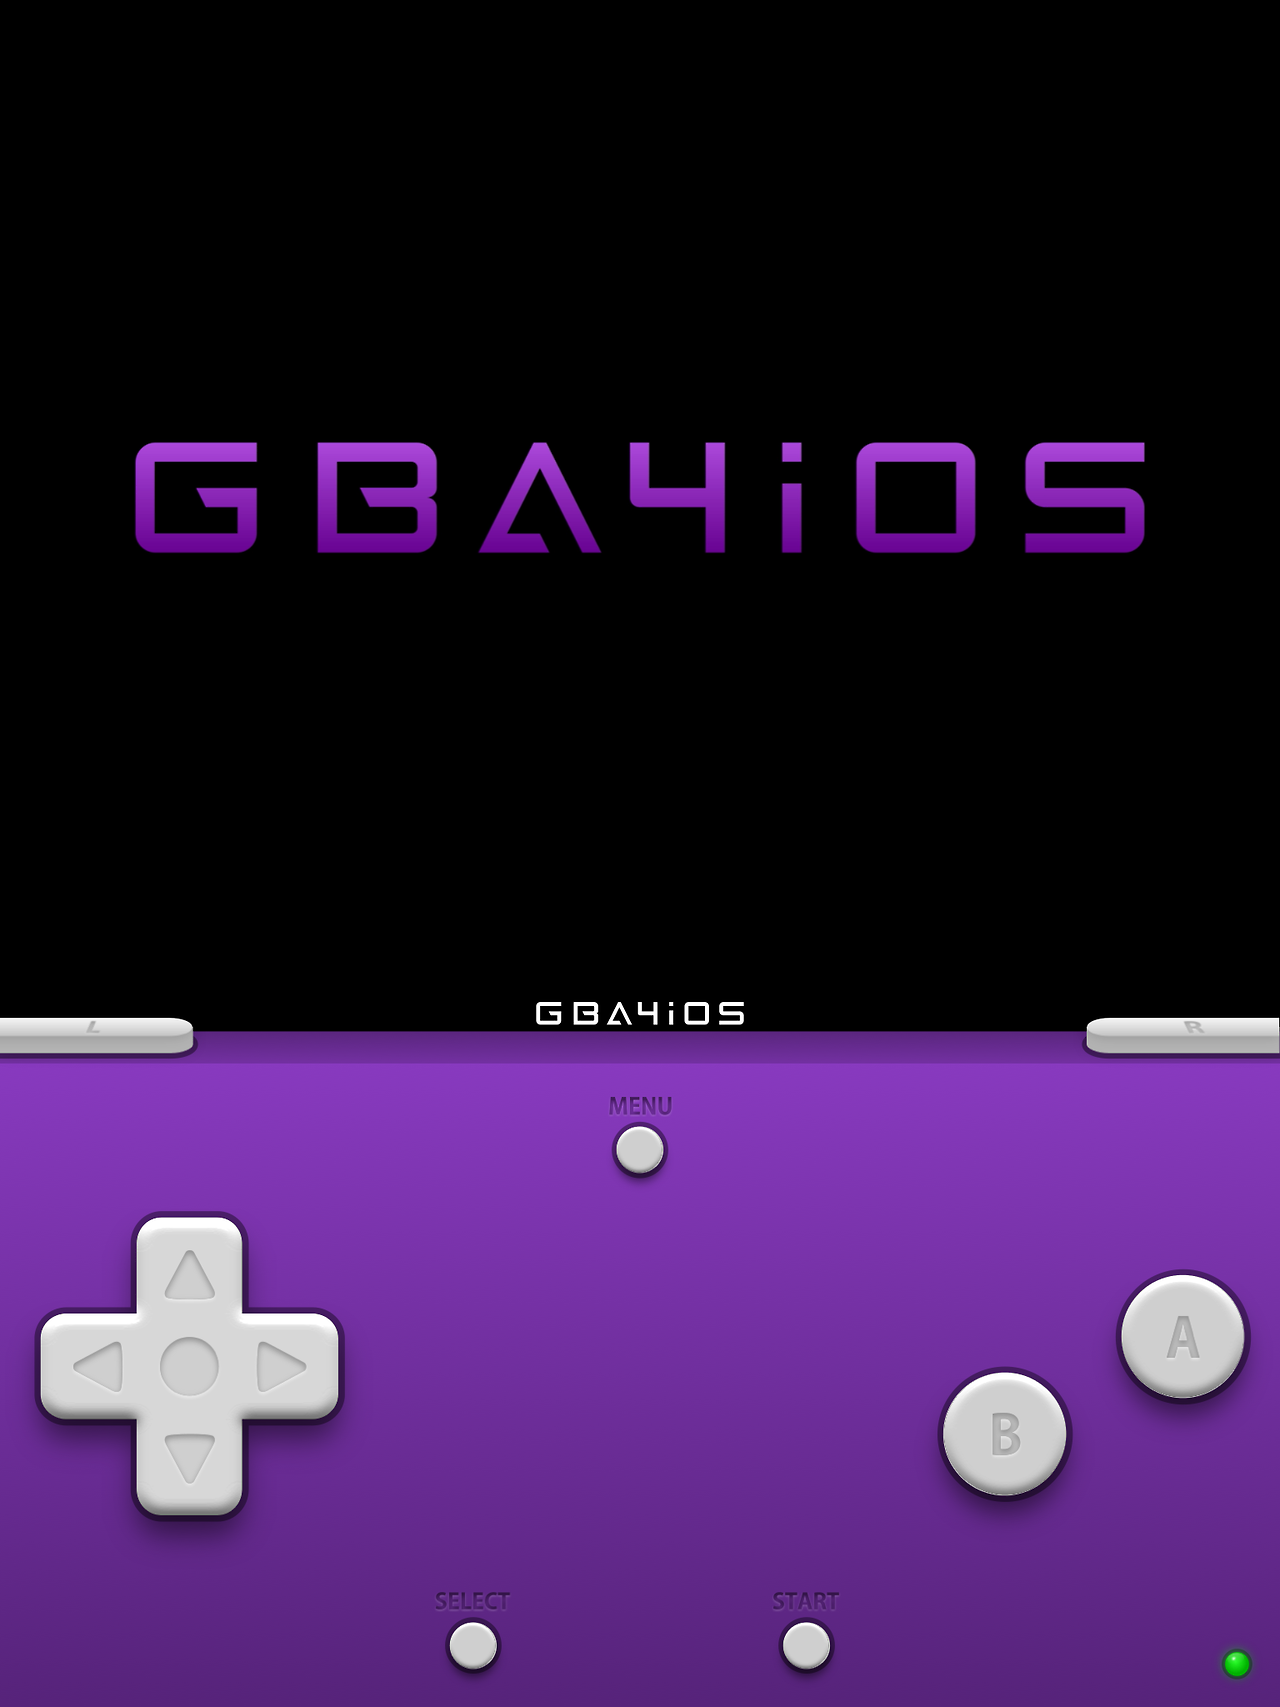 comment installer gba4ios 2.1